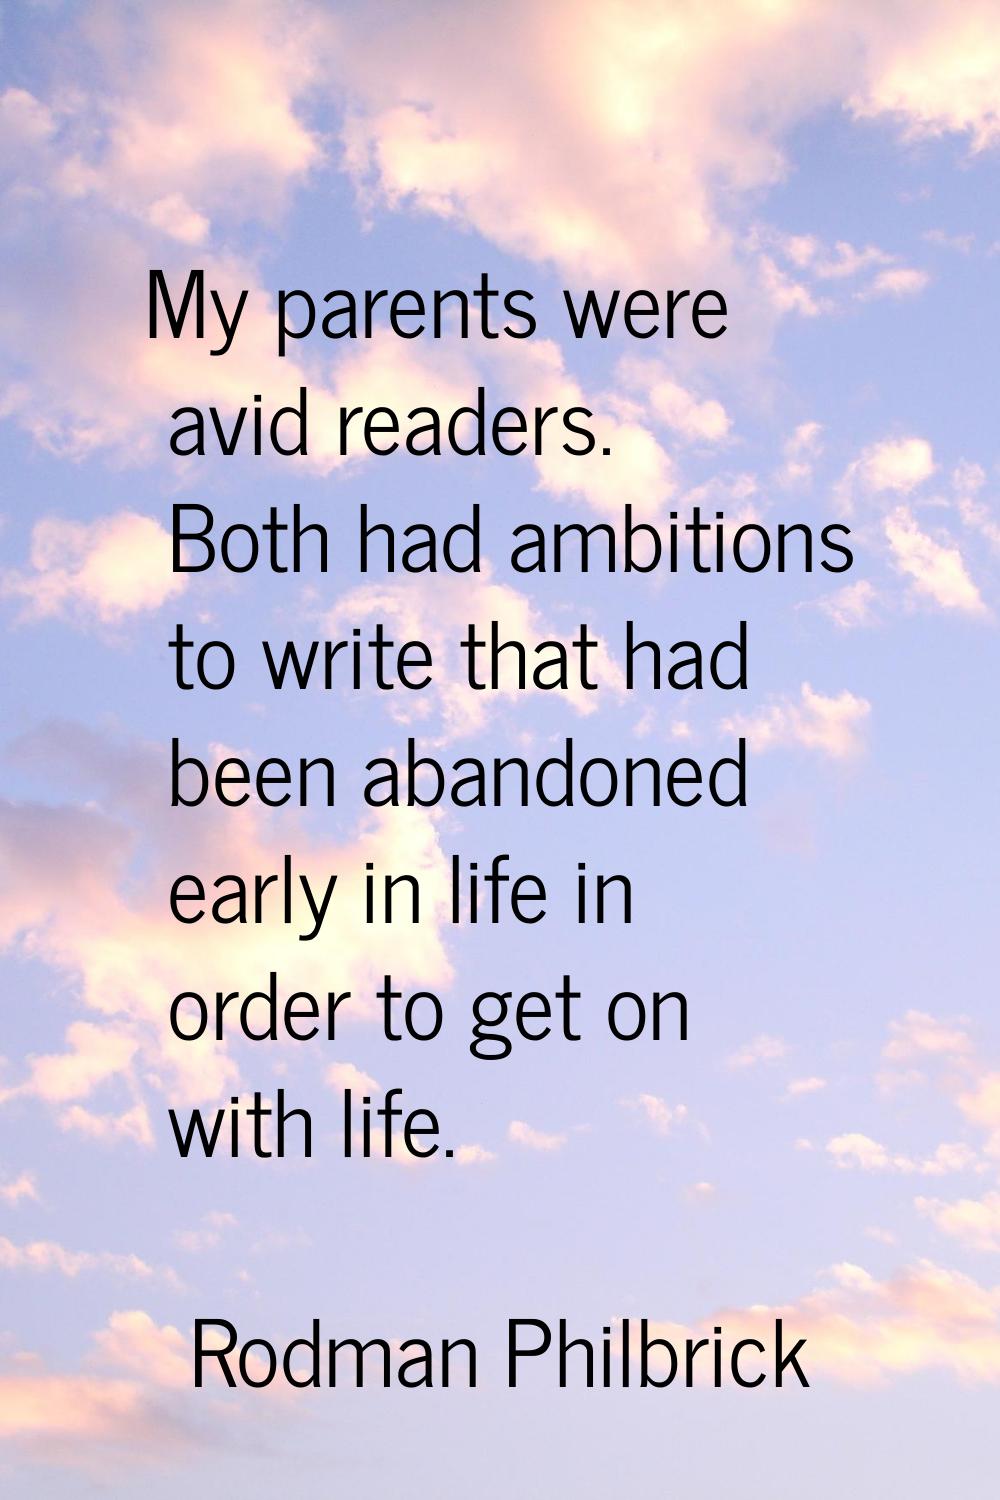 My parents were avid readers. Both had ambitions to write that had been abandoned early in life in 